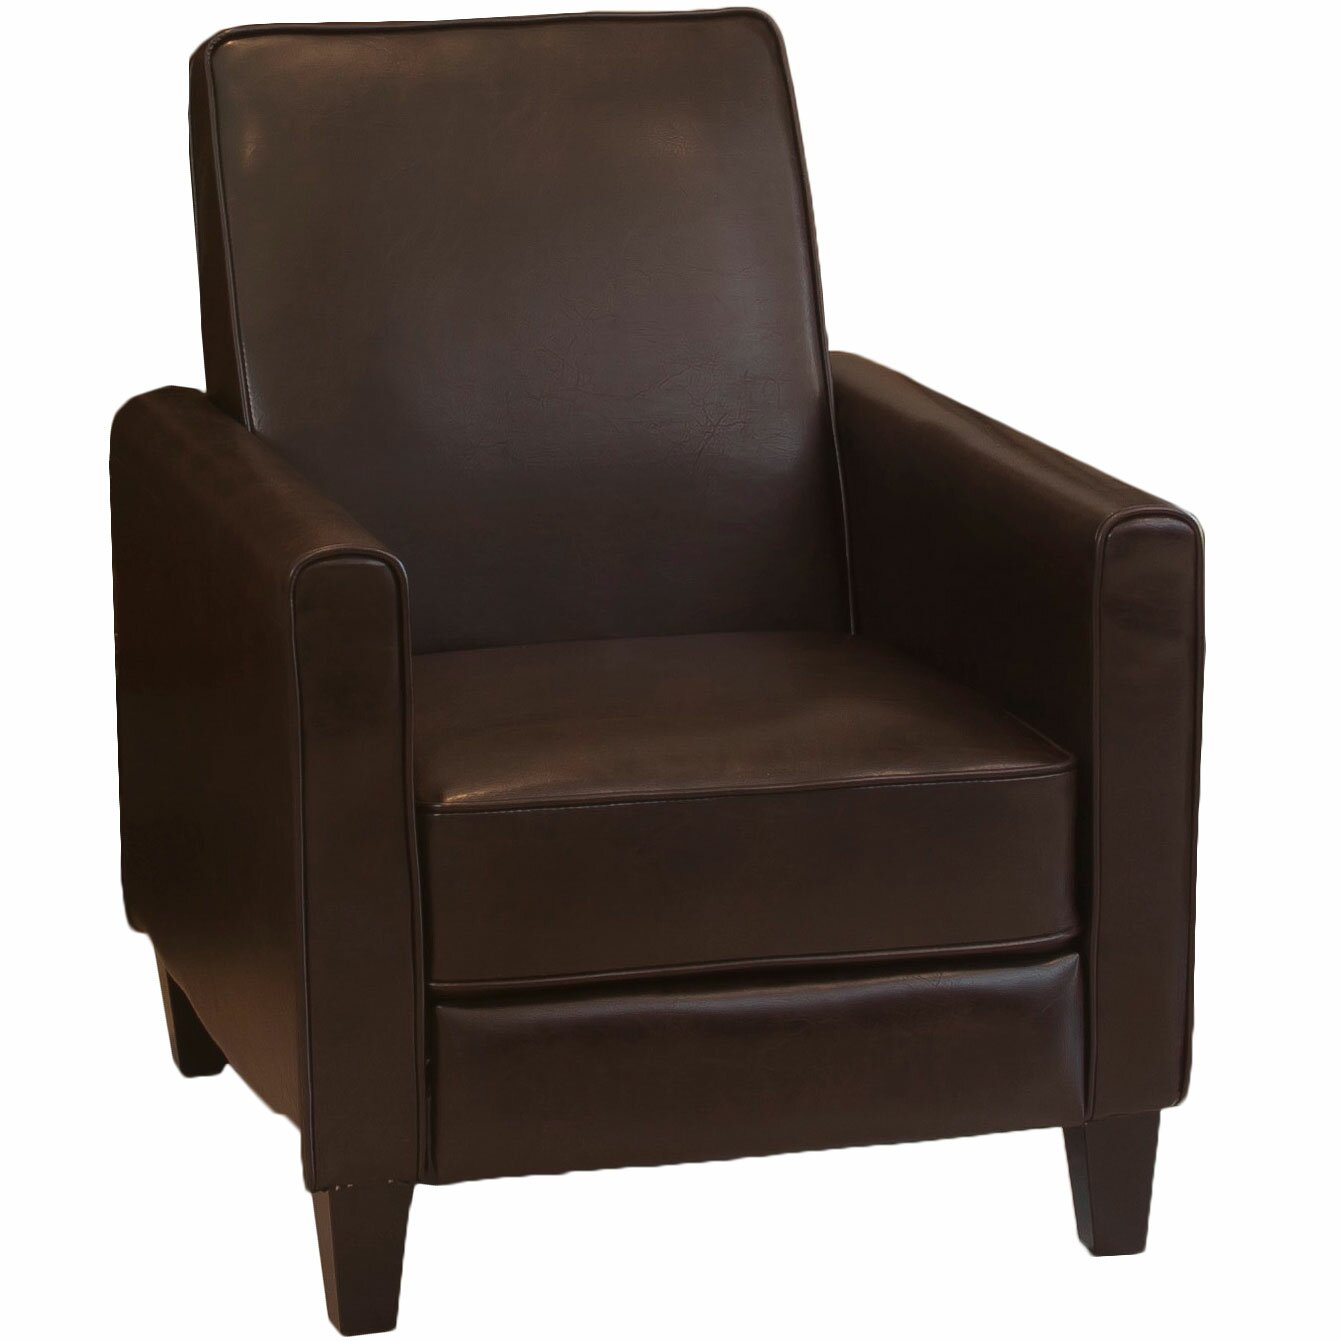 Recliners on Pinterest Gliders, Furniture and Recliner Chairs